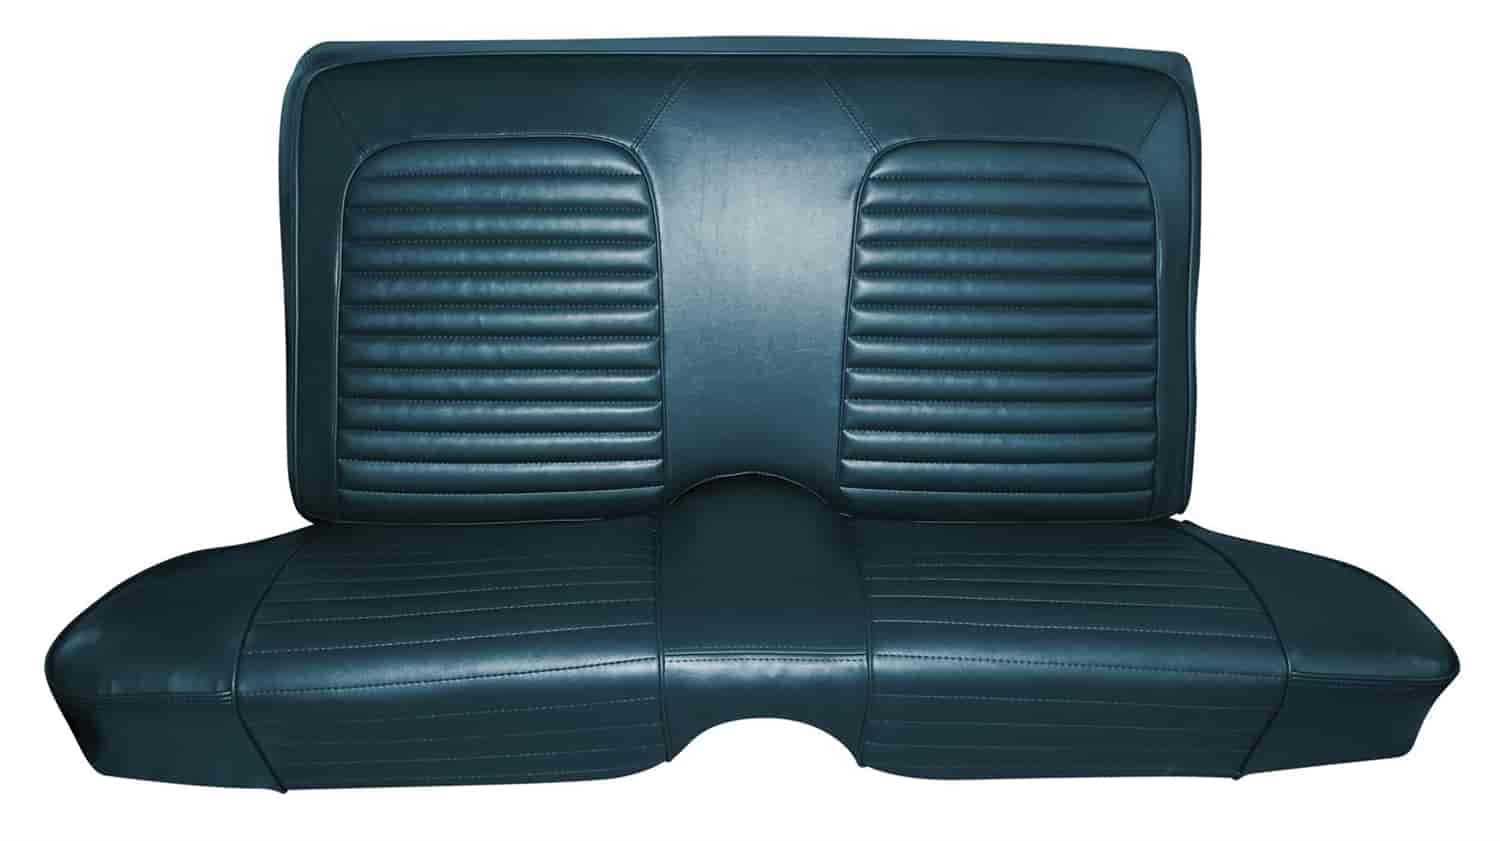 1964 Ford Falcon Futura 2-Door Hardtop Interior Front and Rear Bench Seat Upholstery Set